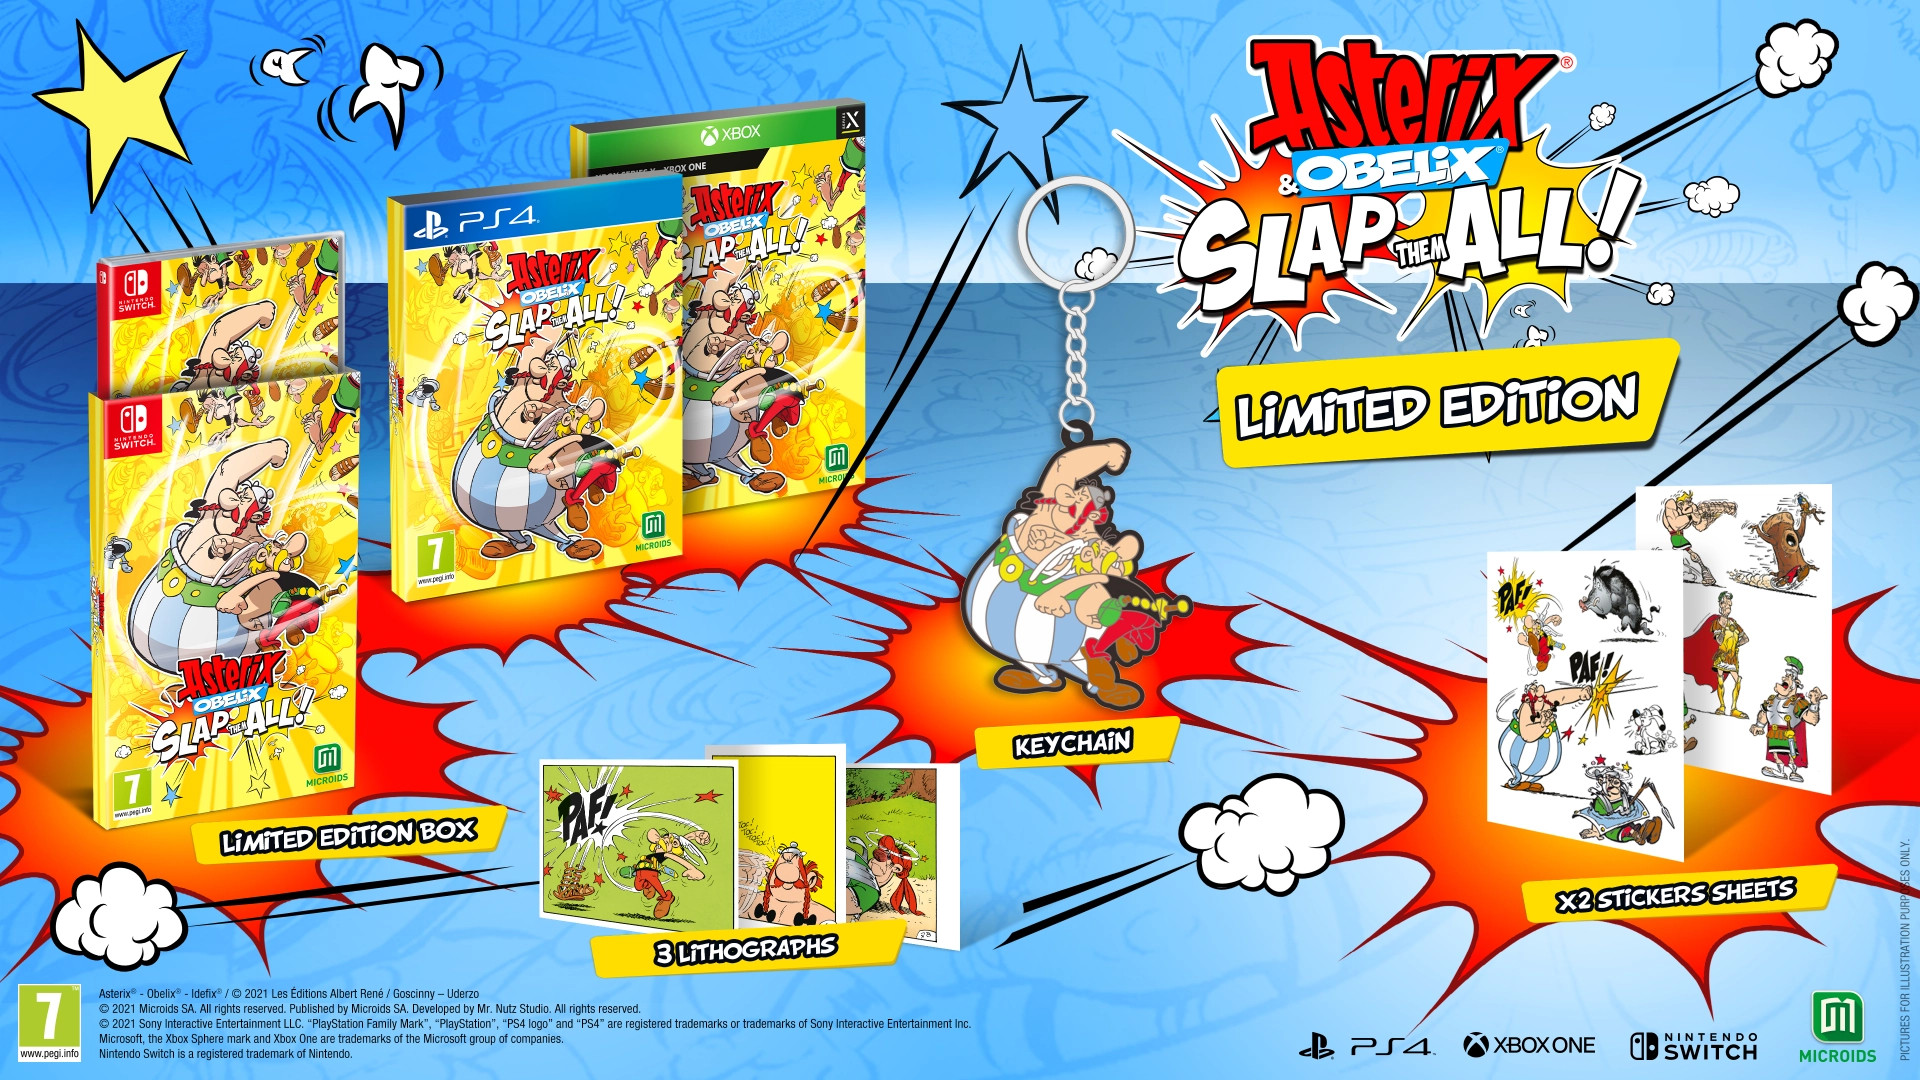 Asterix & Obelix Slap Them All! Limited Edition - Nintendo Switch